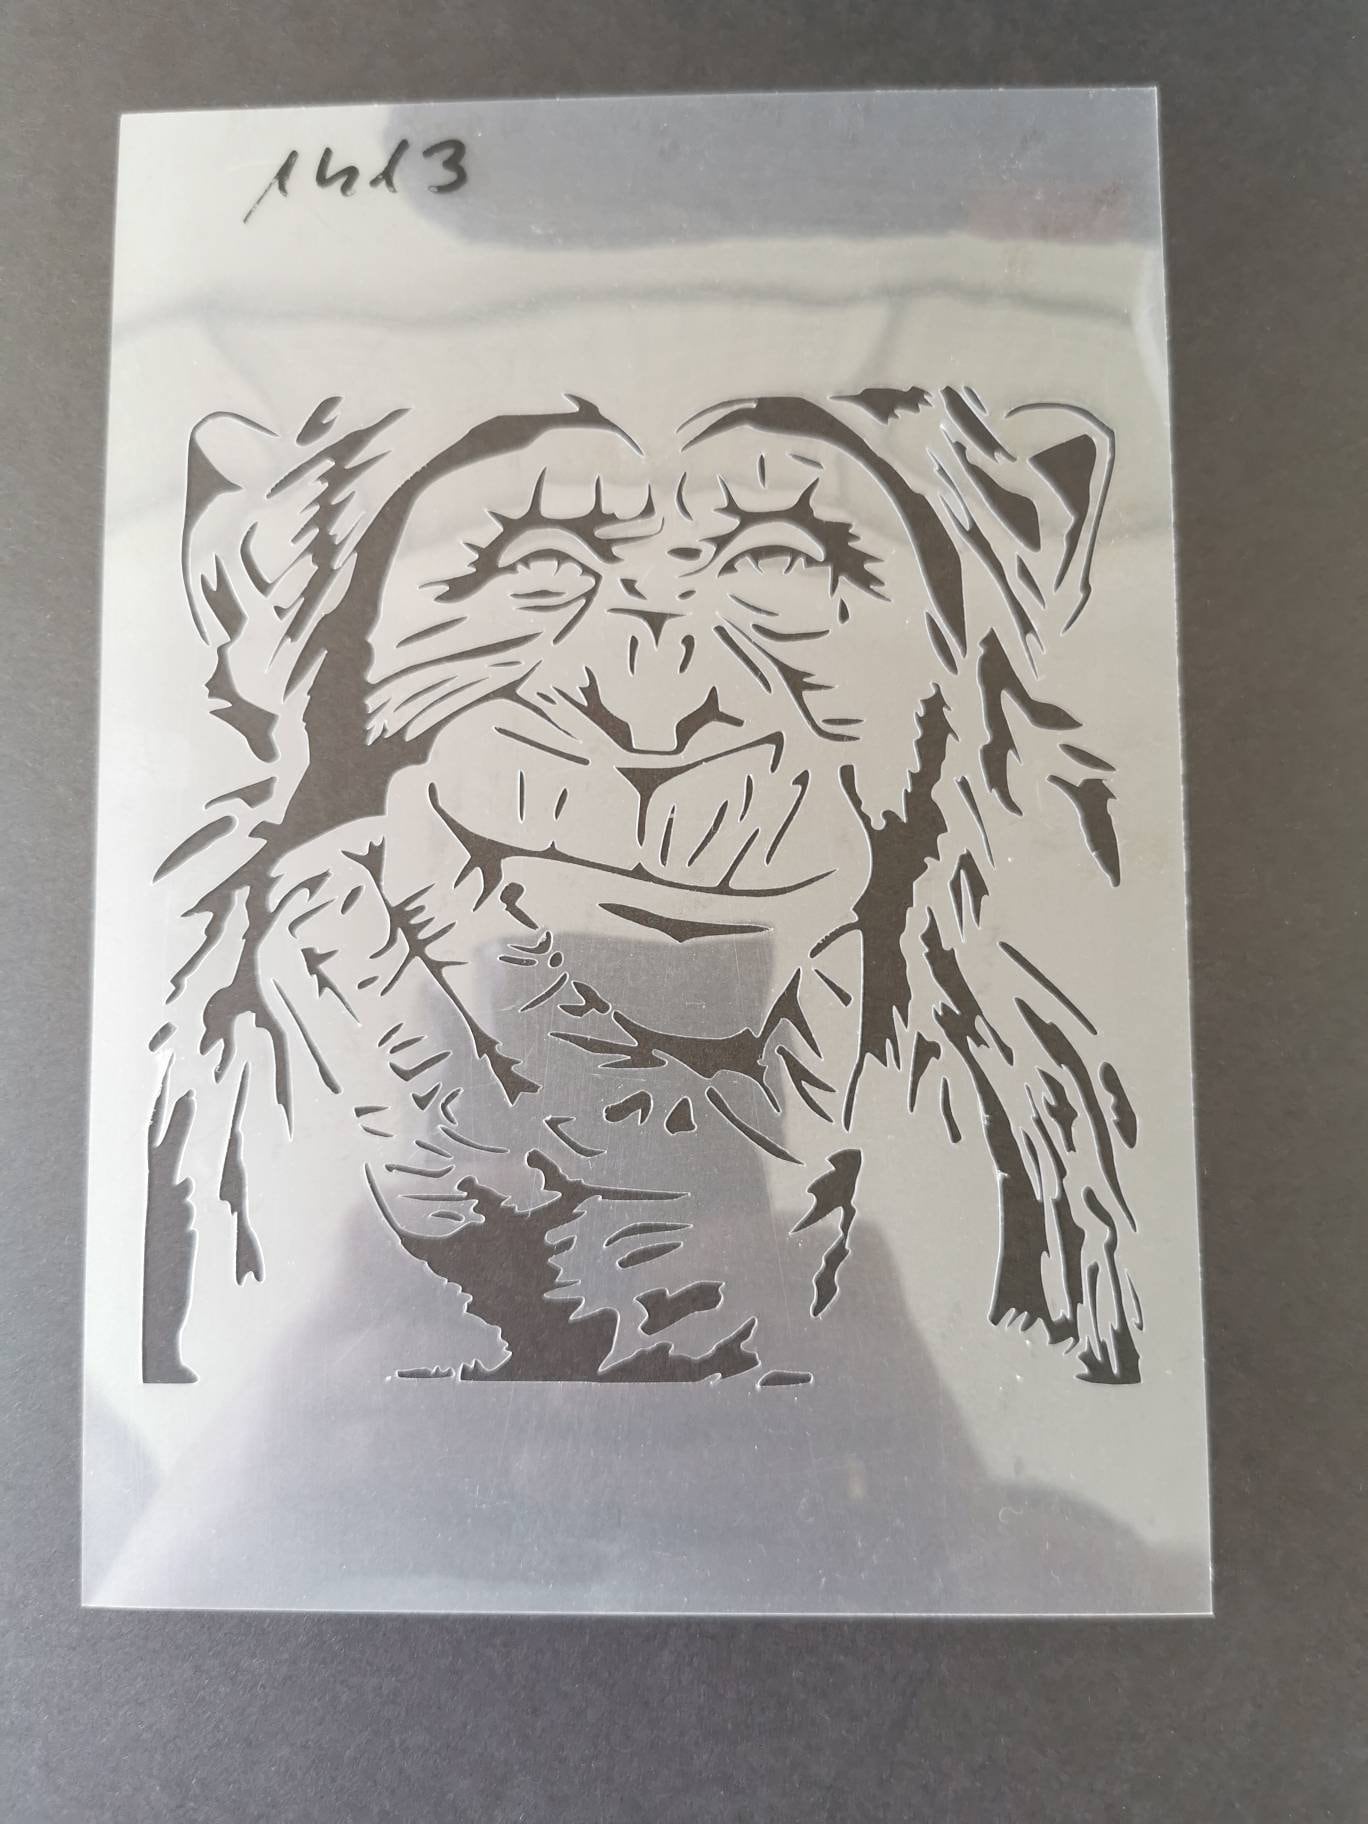 Ape Star Stencil Reusable for Clothes, Food, Painting, Etc 